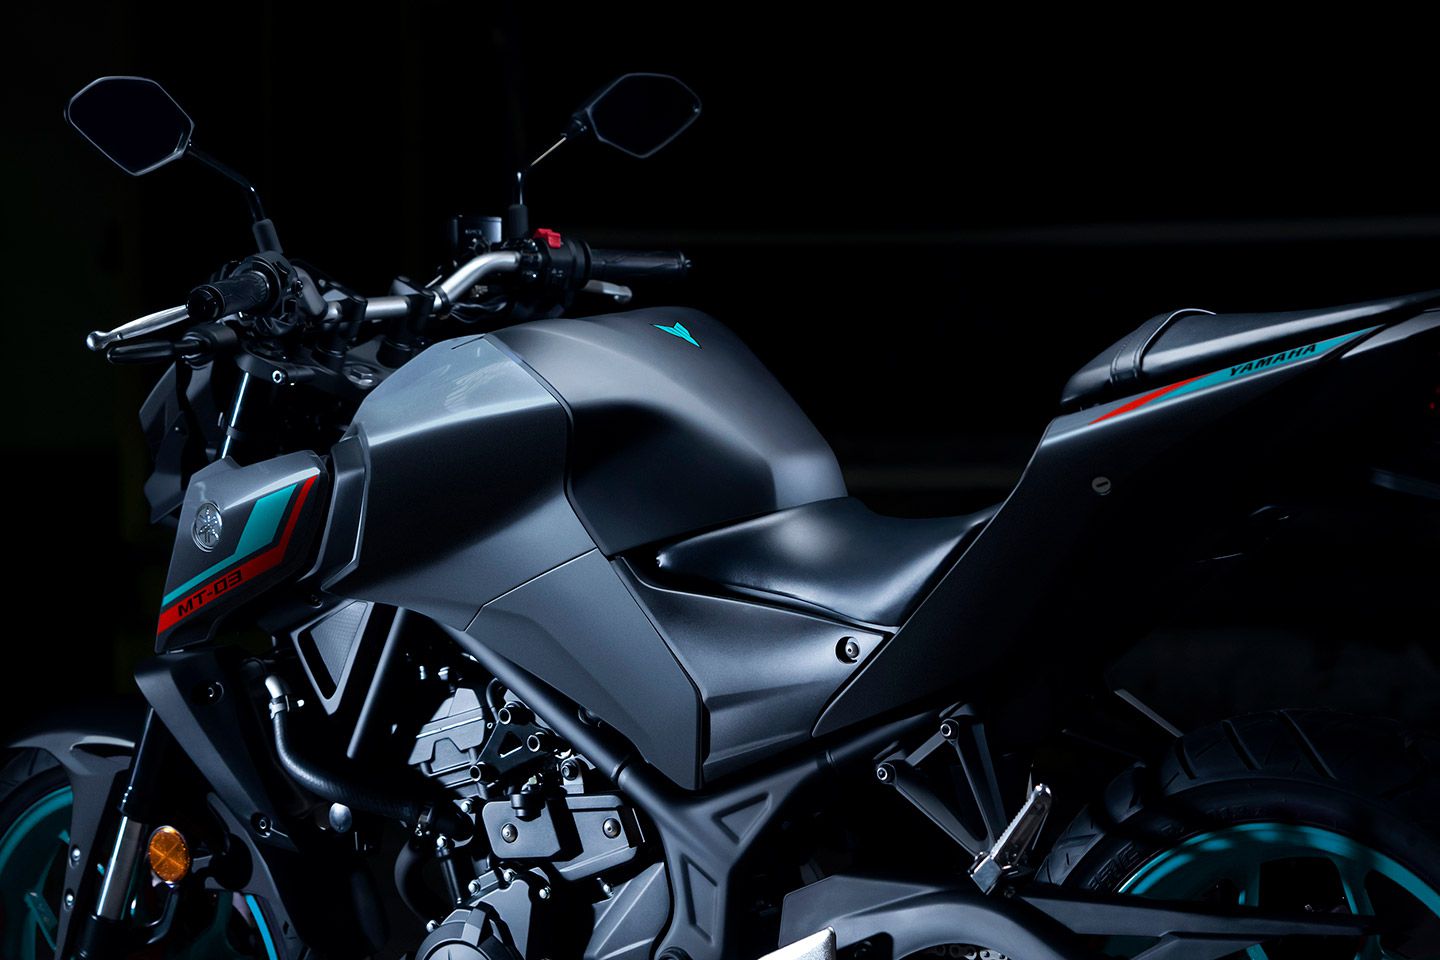 MT-03 riders will have a manageable reach to the ground with the bike’s 30.7-inch seat height.